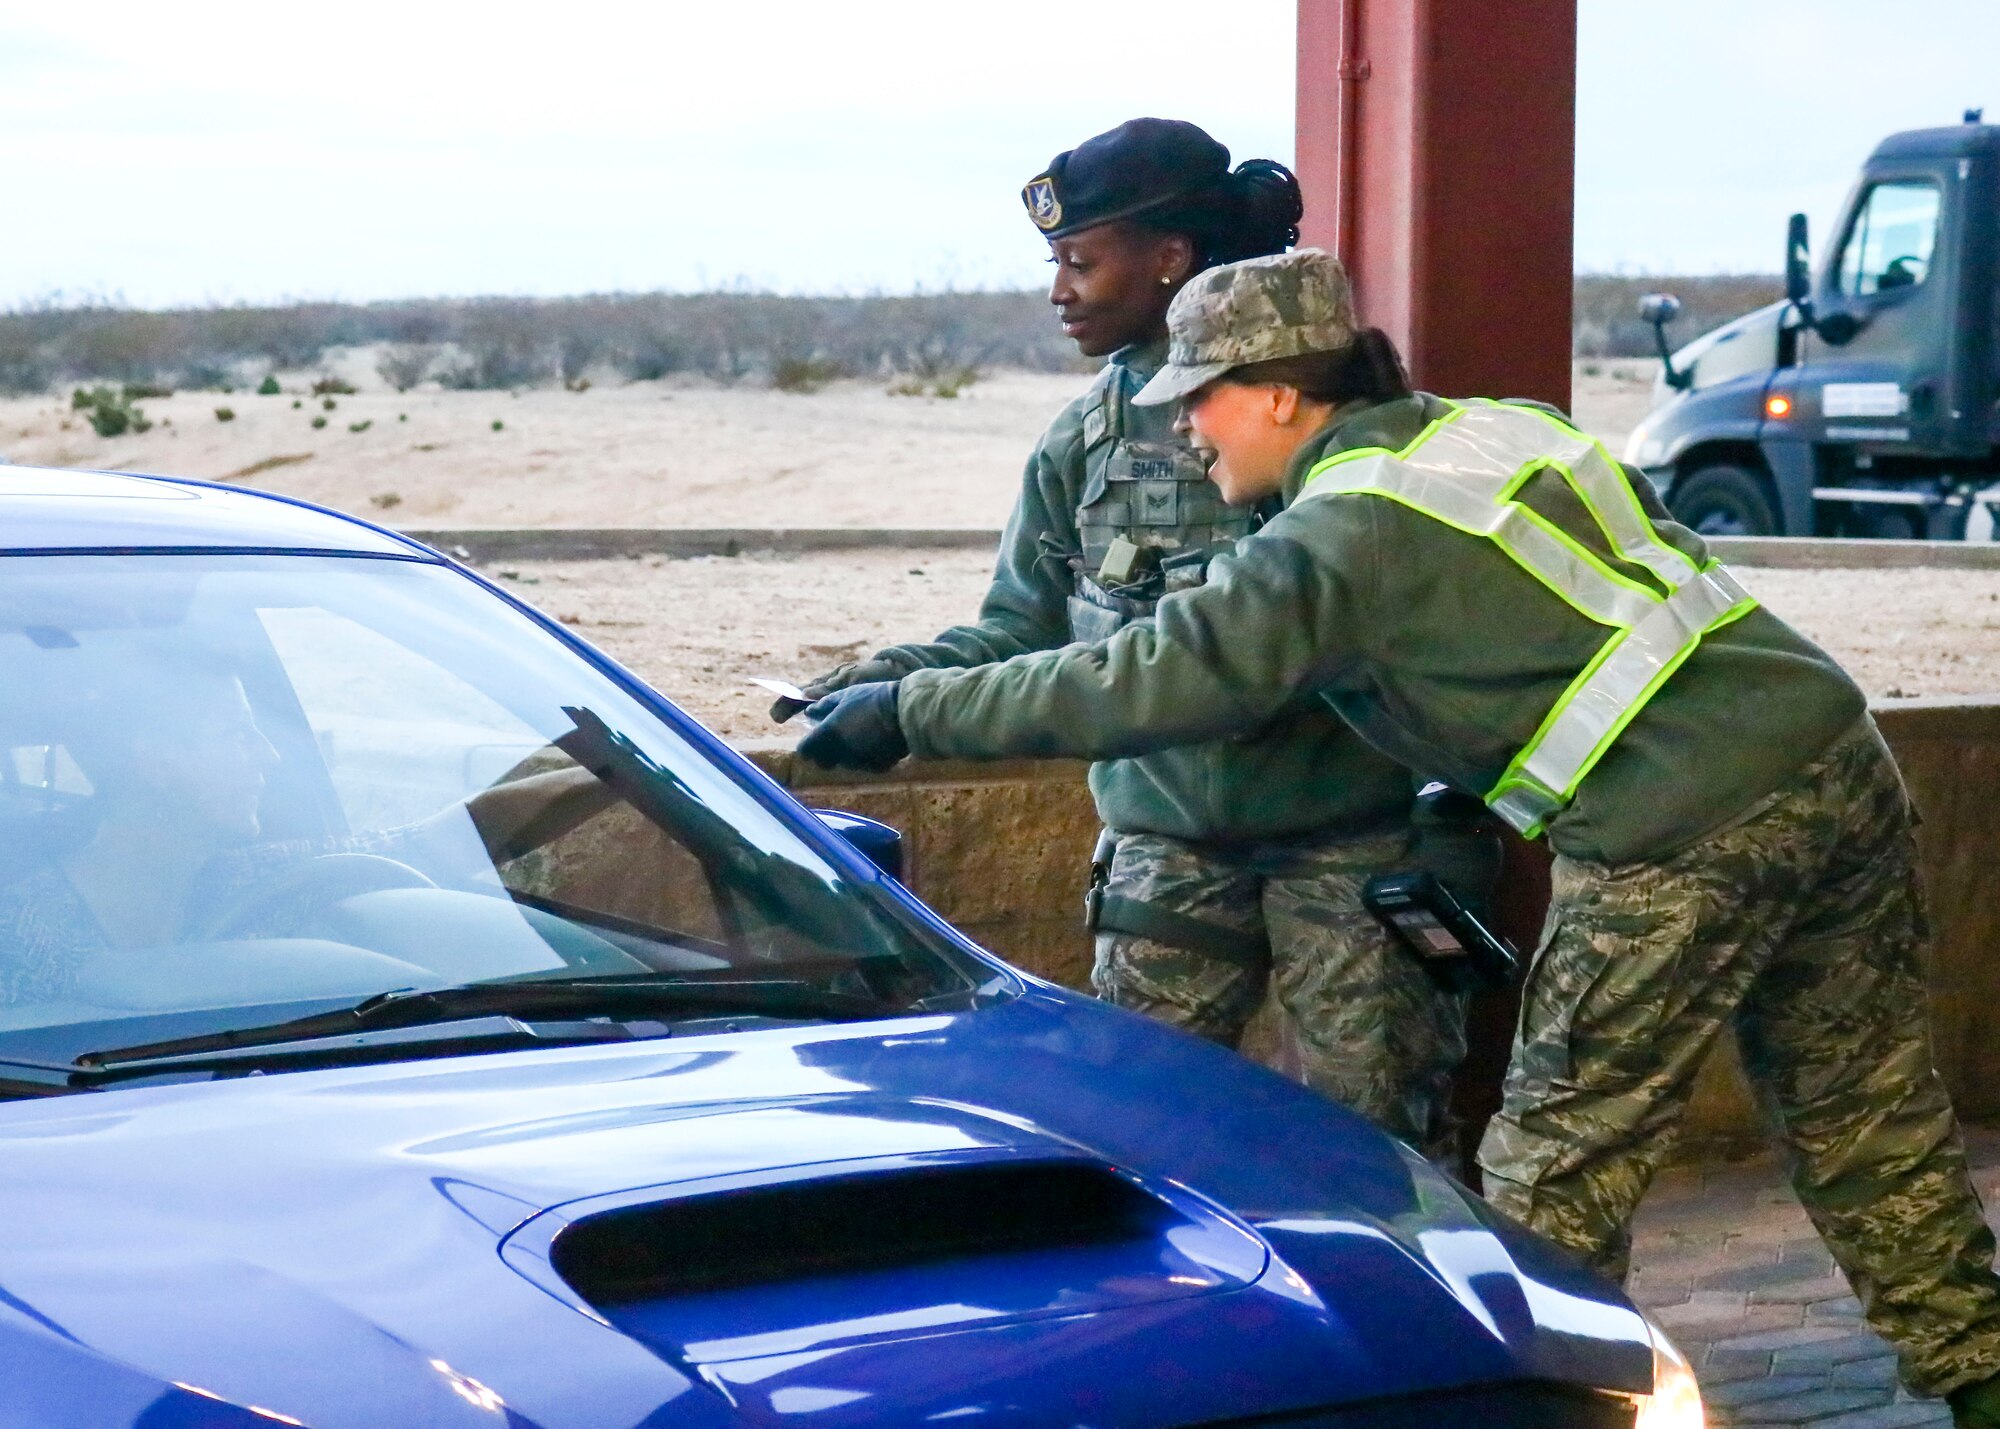 Lt. Col. Neva Vanderschaegen, 412th Medical Support Squadron commander, hands out candy canes to a Team Edwards member at Edwards Air Force Base, California, Dec. 17. (U.S. Air Force photo by Giancarlo Casem)